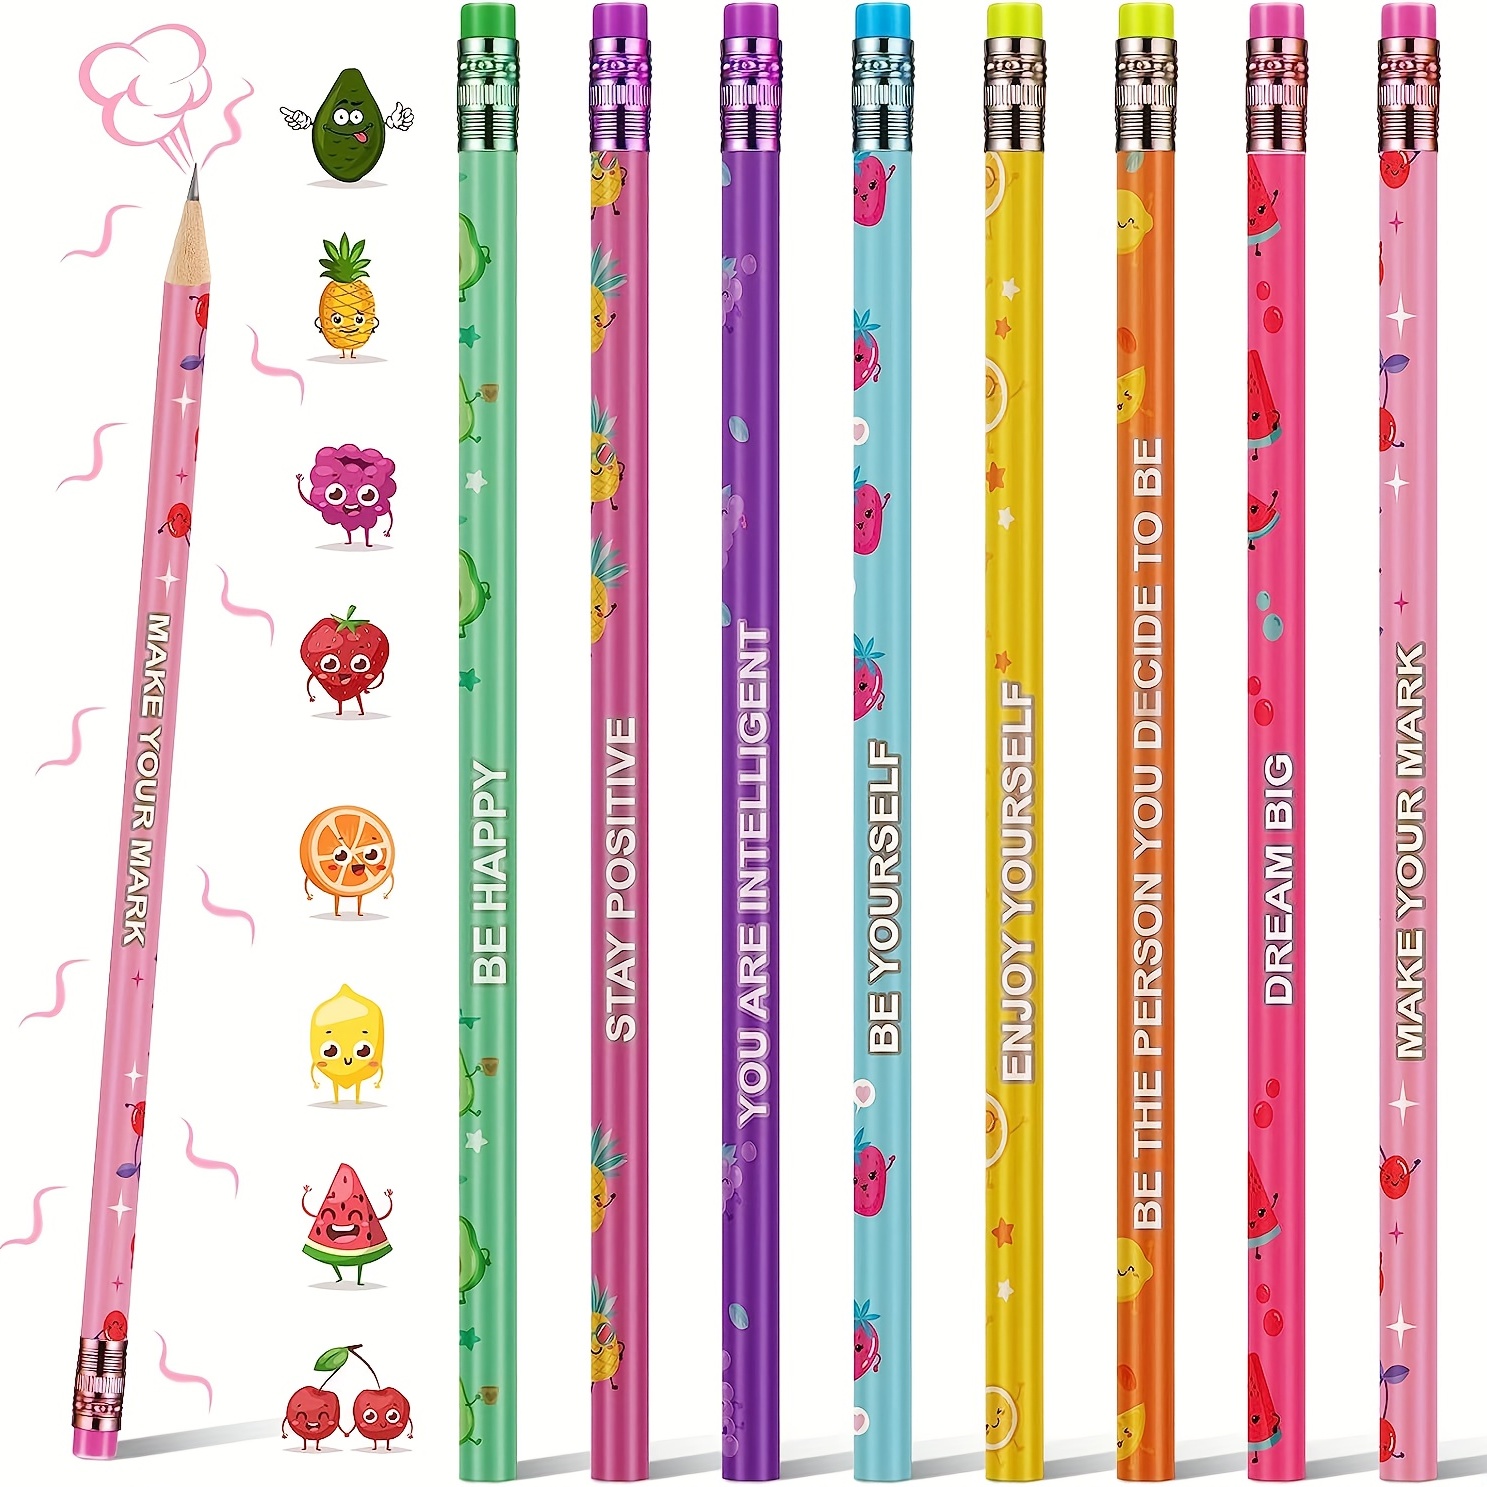 Mega Stationers Multi Colored Striped Magic Pencil With Eraser, 12 Inches  long, Soft Bendy Flexible For Kids- Great Fun!! Gift For Students or